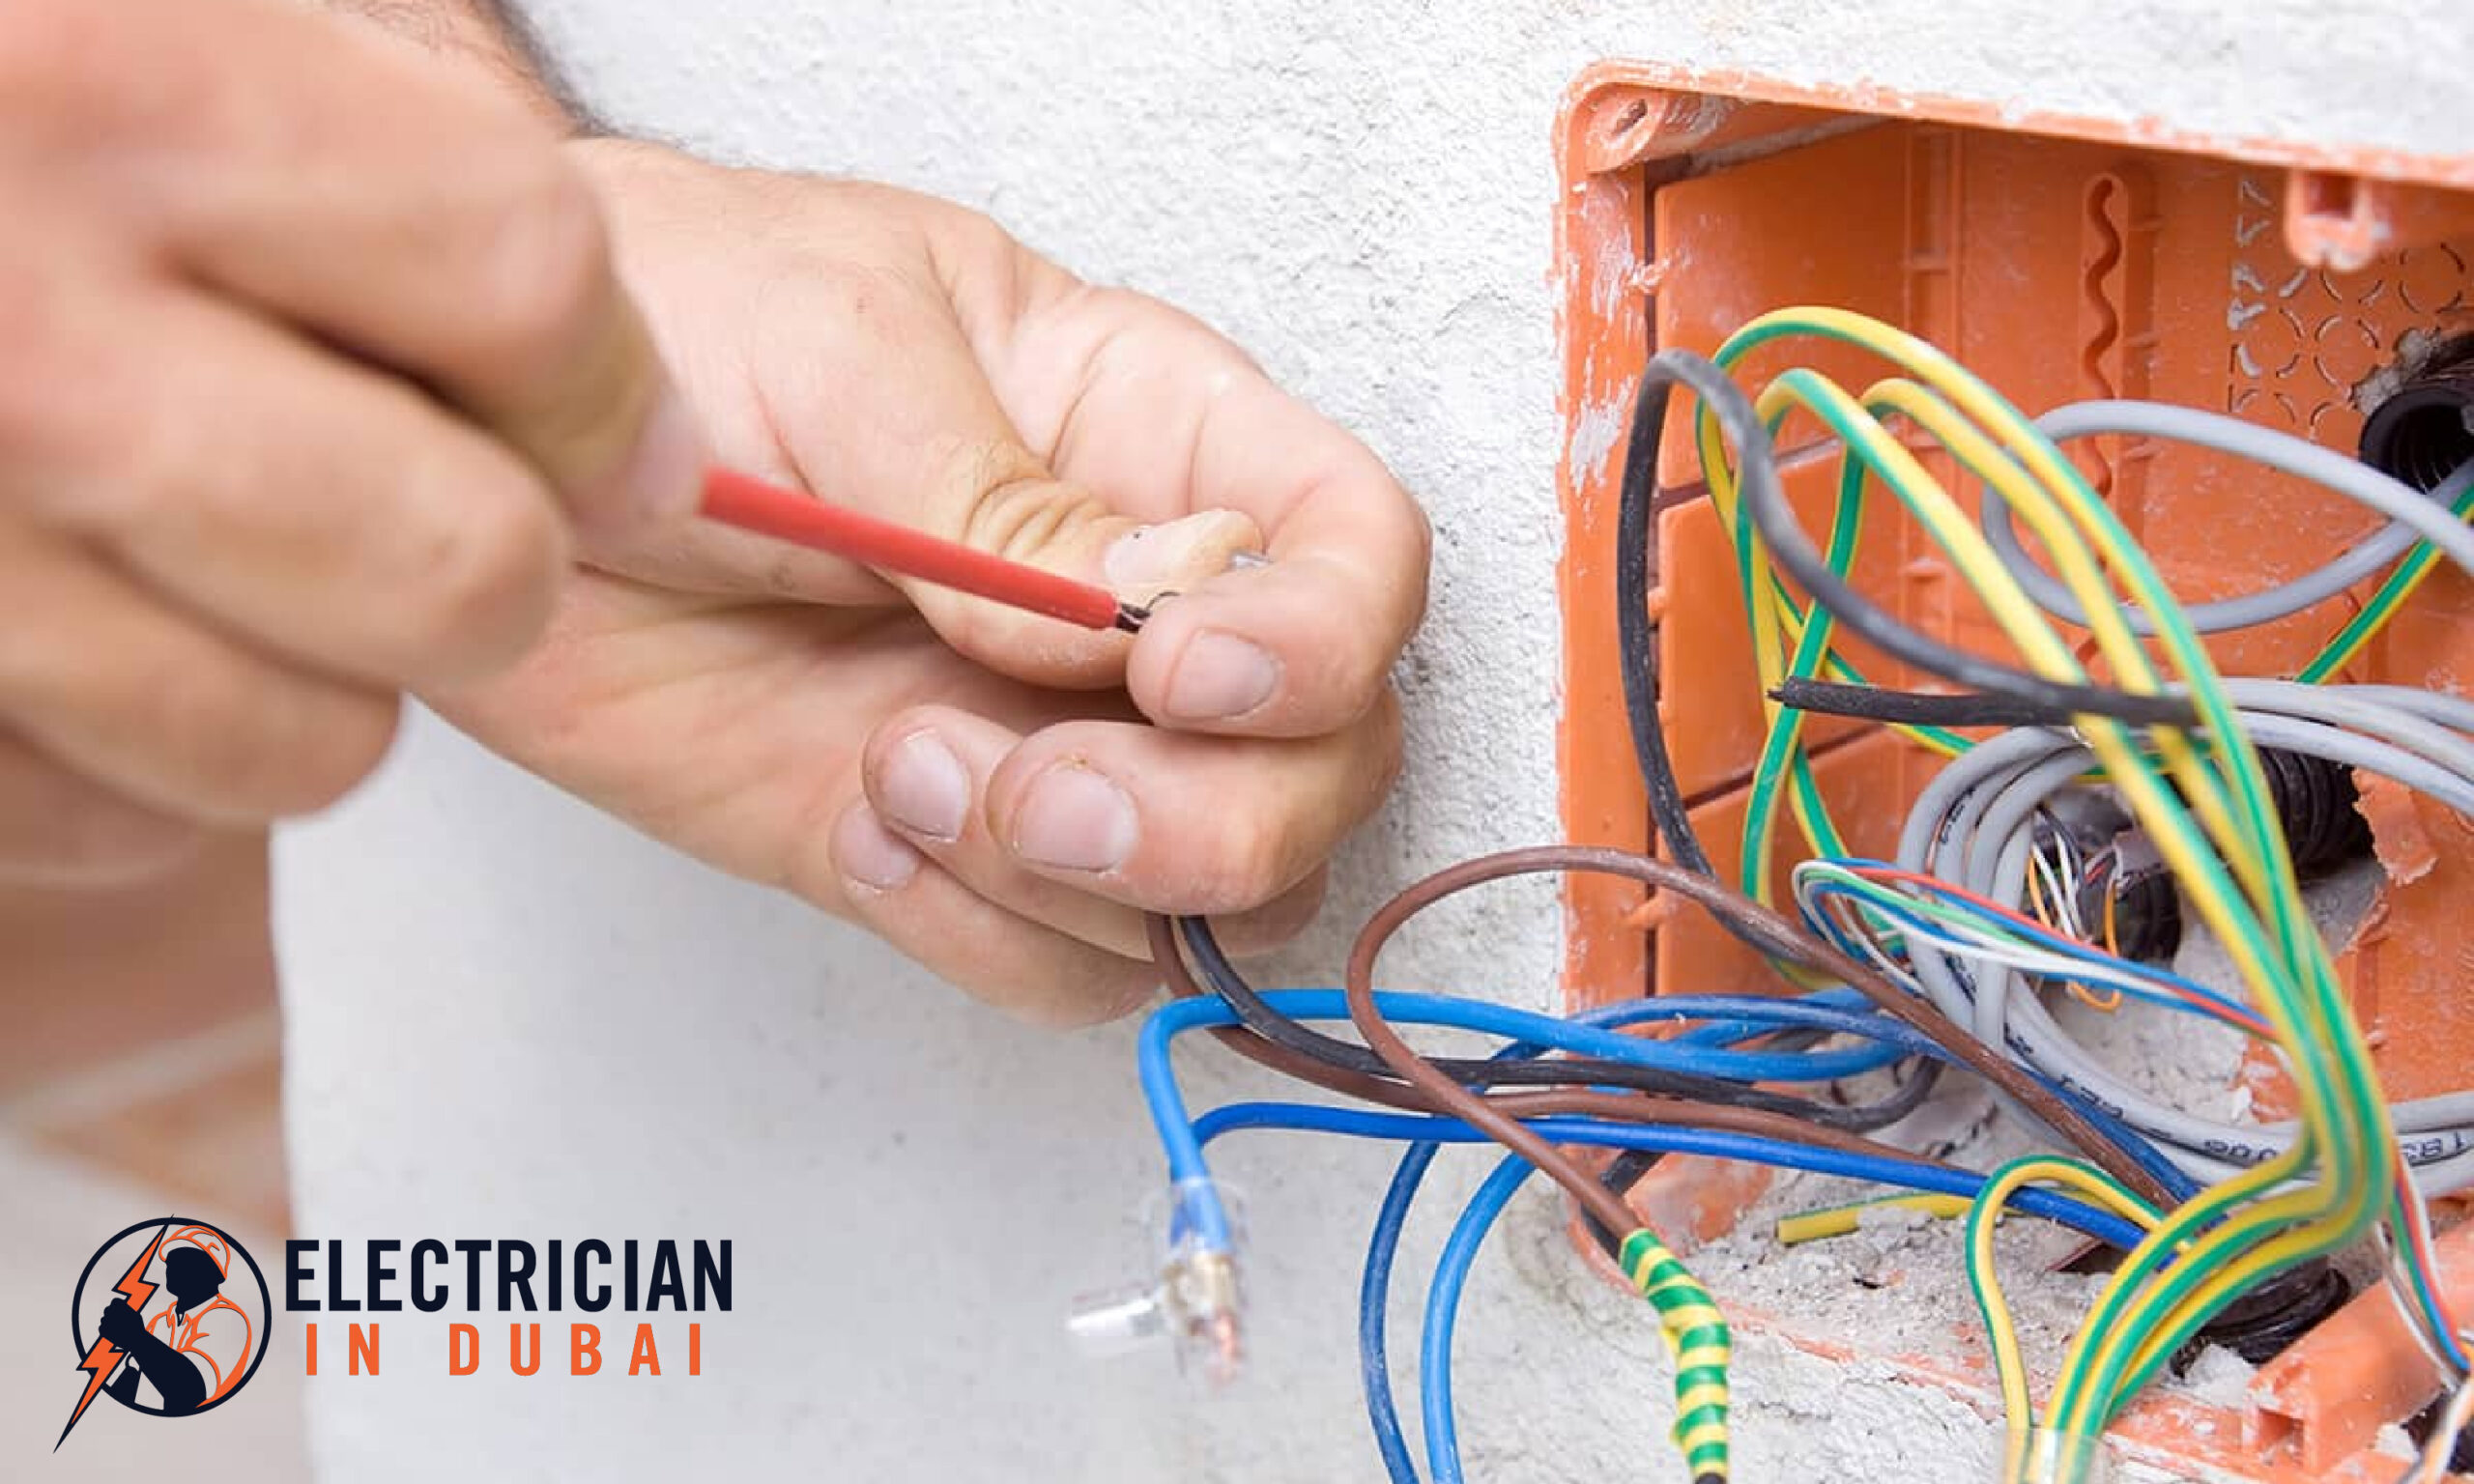 Trusted electrician in Dubai, illuminating spaces with expert wiring, lighting solutions, and top-notch electrical services.